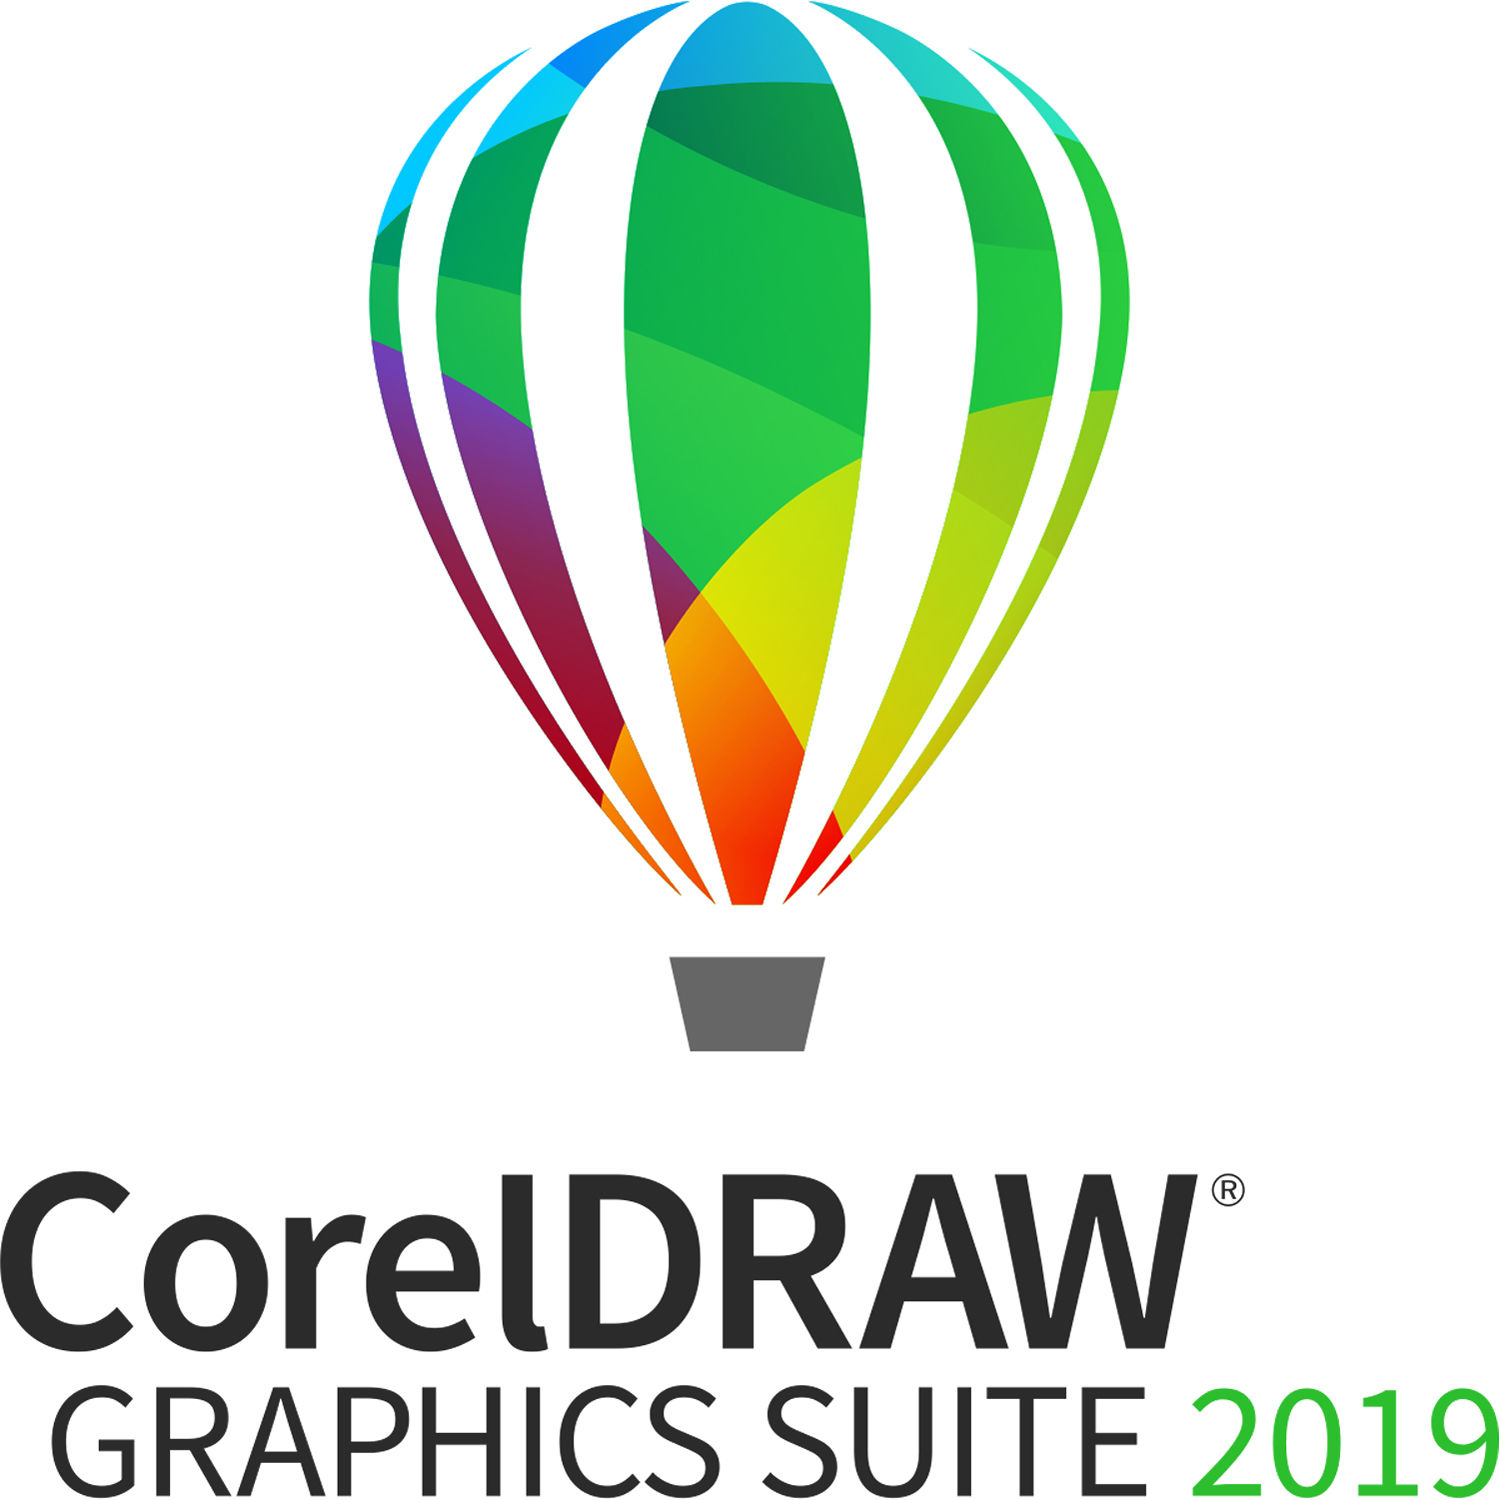 Corel Draw 2019 Suite for advanced Graphic Design projects and Large format Printer applications